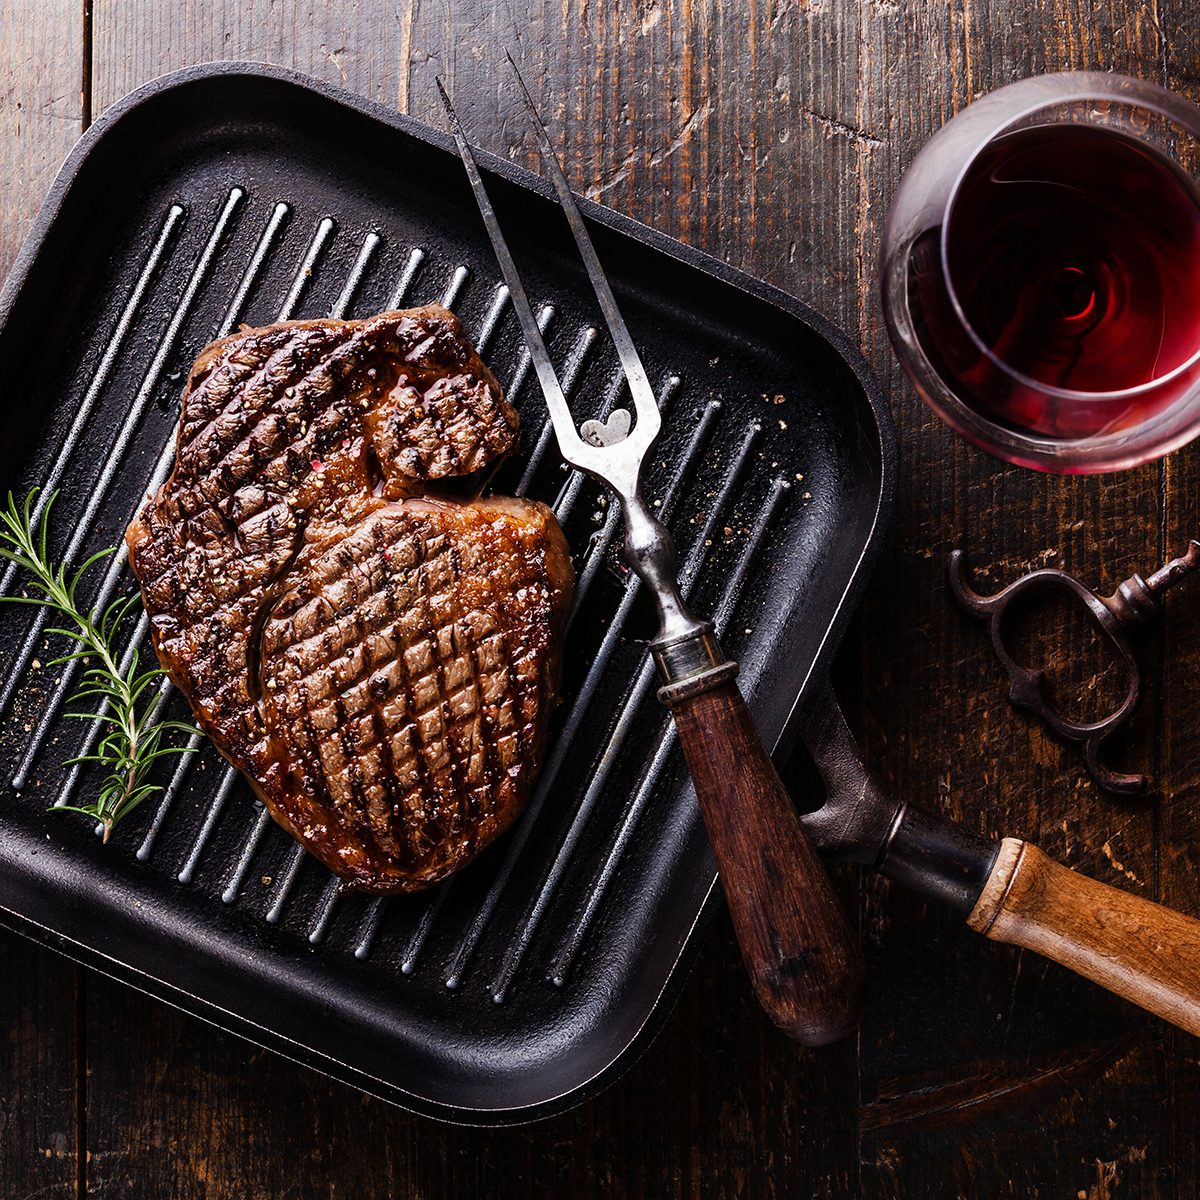 Grilled Black Angus Steak Ribeye on grill iron pan on wooden background with wine